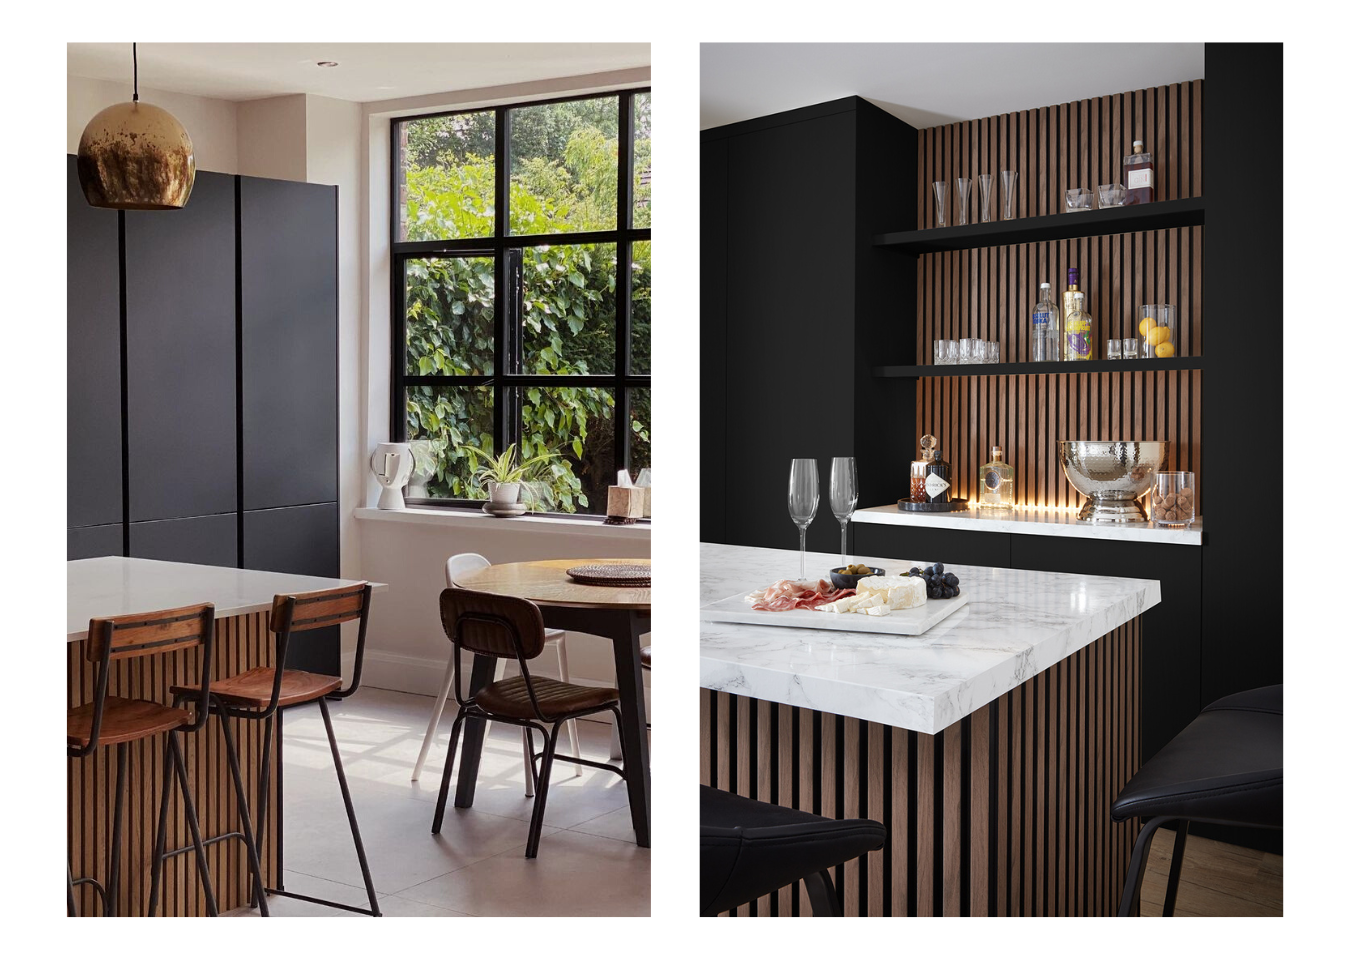 Two images show kitchens with SlatWall. The image on the left shows a kitchen island with the front covered in SlatWall with two bar stools and a dining table. The image on the right shows another kitchen island and shelves both covered in SlatWall. The island has two glasses of champagne and a sharing bored, the shelves behind display bottles and glasses.